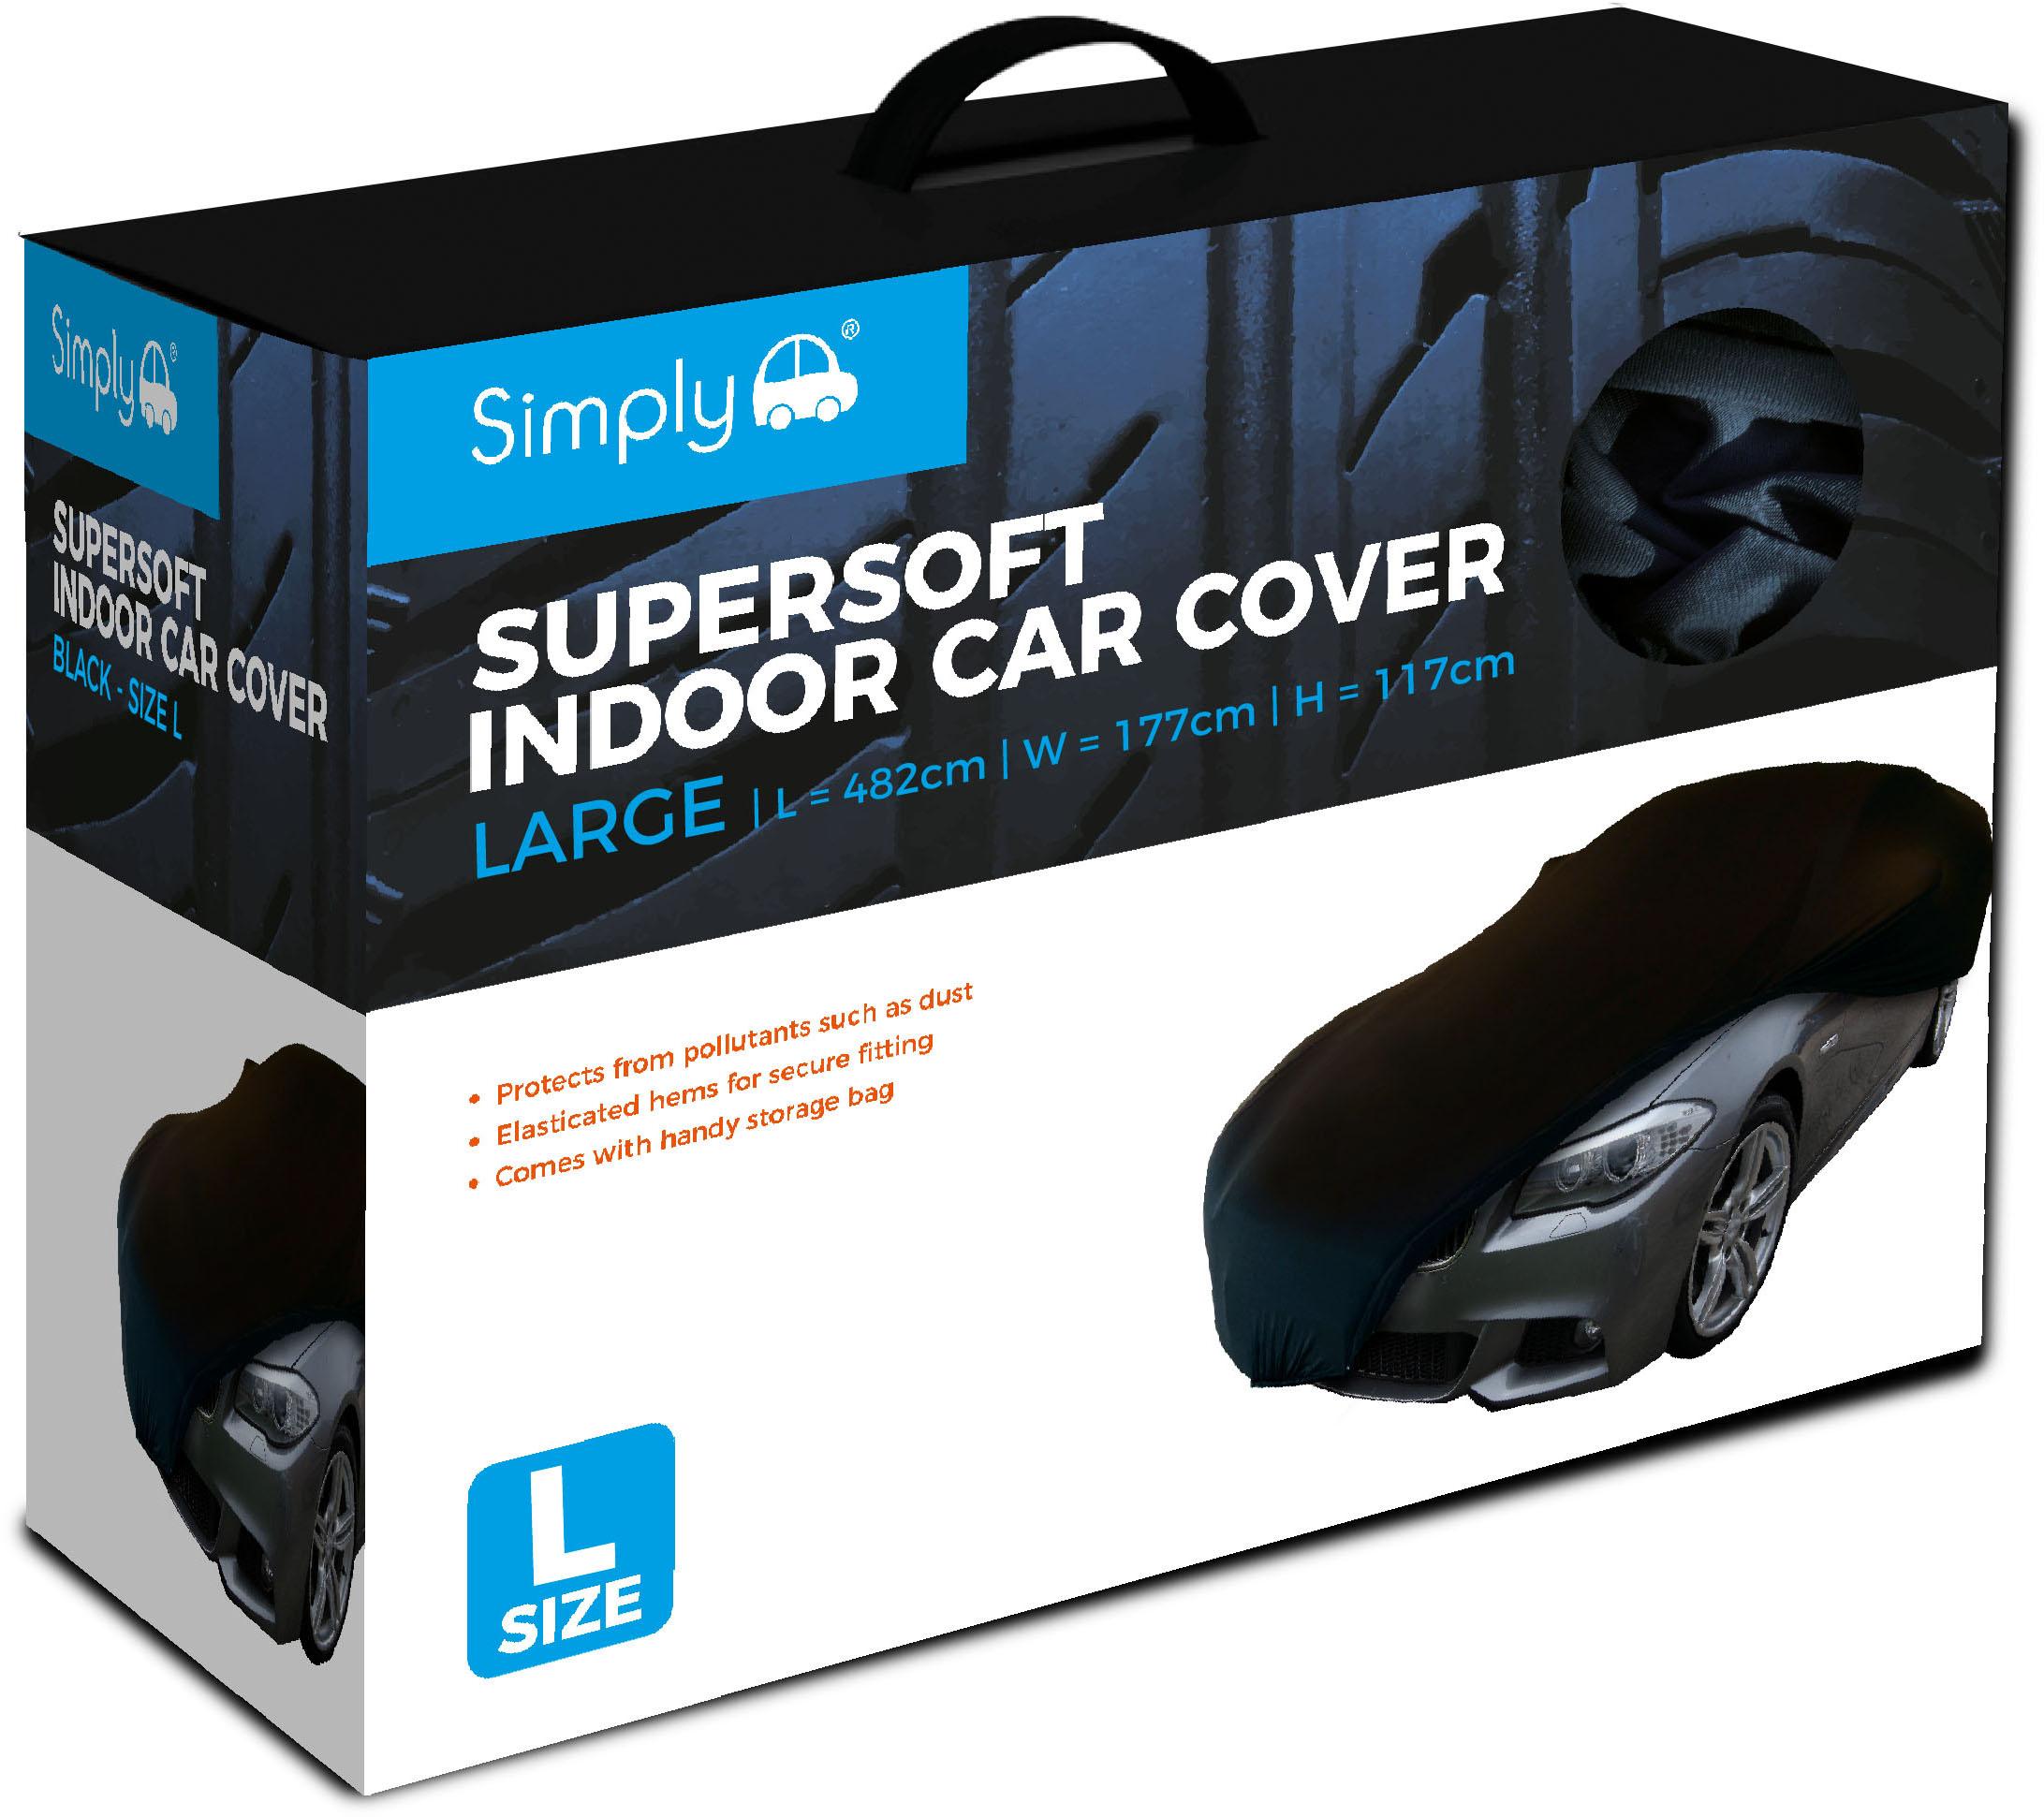 Simply Supersoft Indoor Car Cover - Small